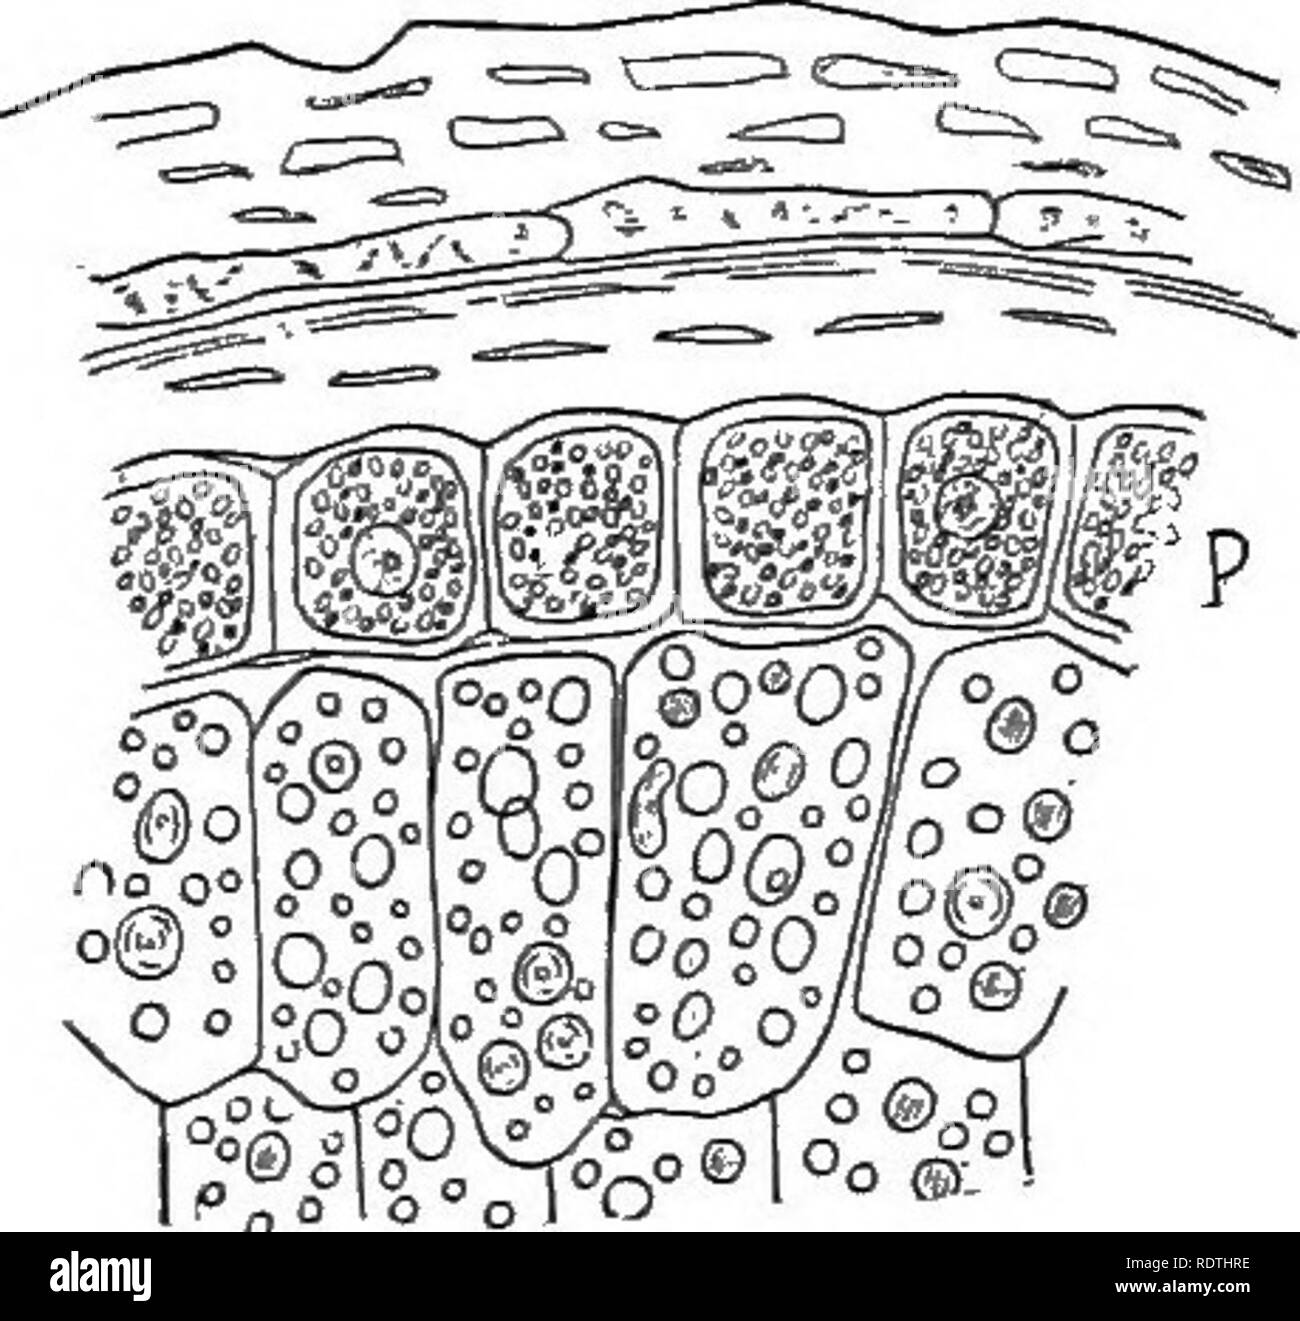 . Nature and development of plants. Botany. FiG. II. Fig. 12. Fig. II. Starch grains: A, from bean. B, from potato. C, compound grain from potato. Fig. 12. Section of the outer portion of a grain of wheat: /&gt;, cells containing proteid grains. The larger cells are filled with starch.—After Strasburger. sided as in the potato (Fig. 11, B). Frequently two or more grains originate in one leucoplast and compound grains result (Fig. II, C). Proteids and other foods are likewise transported in solution to the storage organs where they may or may not be deposited in solid form. This is usually effe Stock Photo